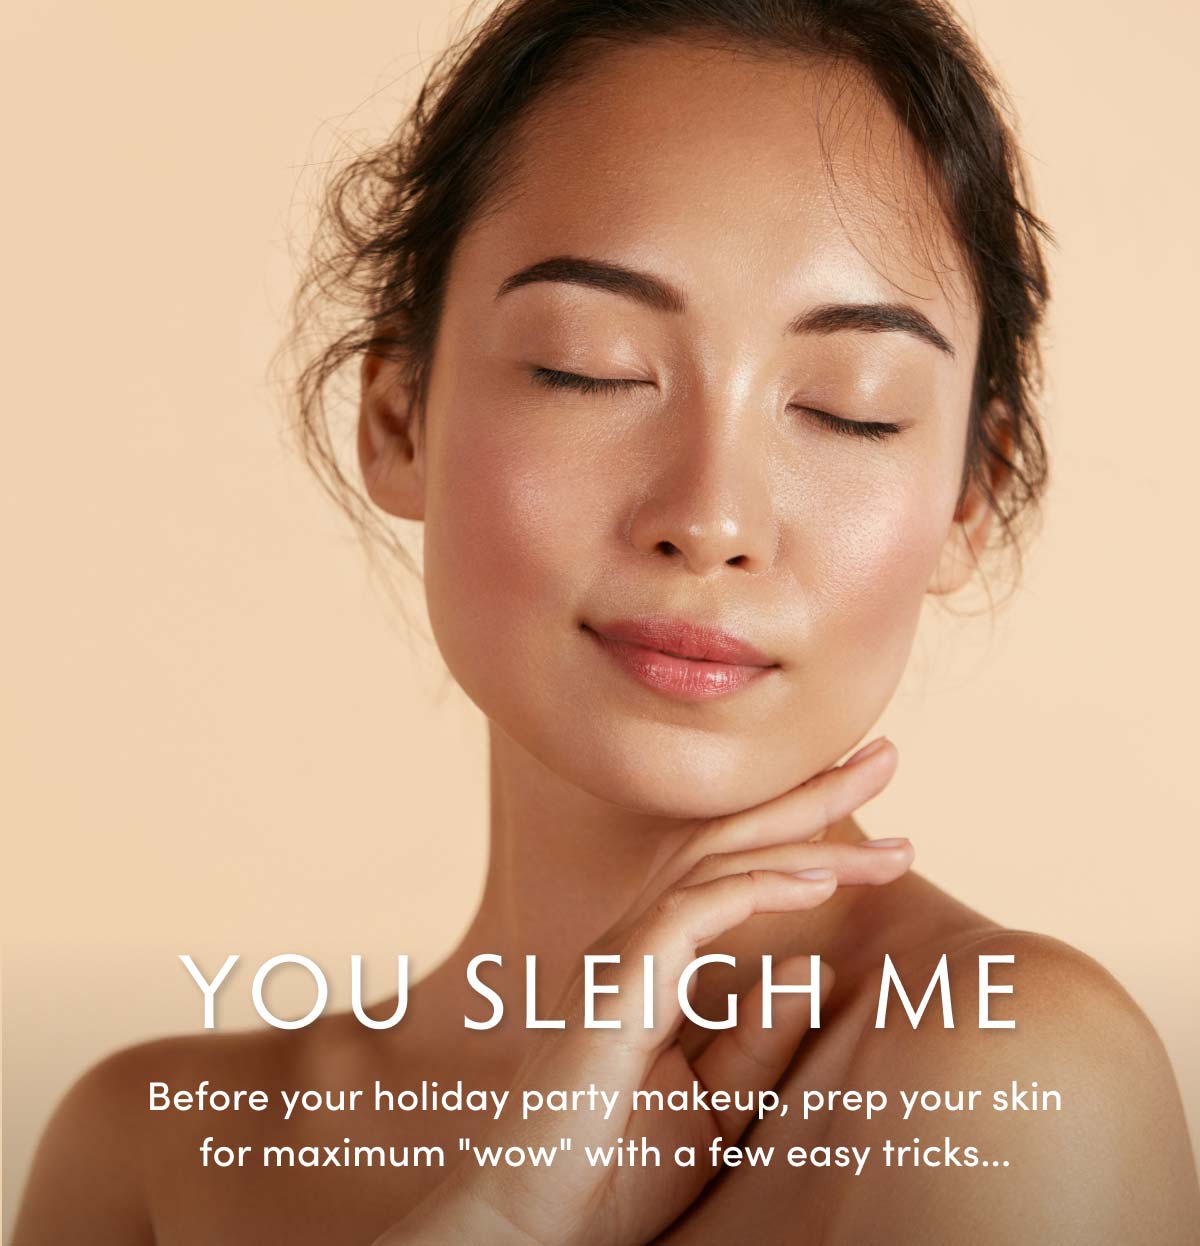 Before your holiday party makeup, prep your skin for maximum "wow" with a few easy tricks... Before your holiday par akeup, prep your skir for maximum "wow*With a few easy tricks 